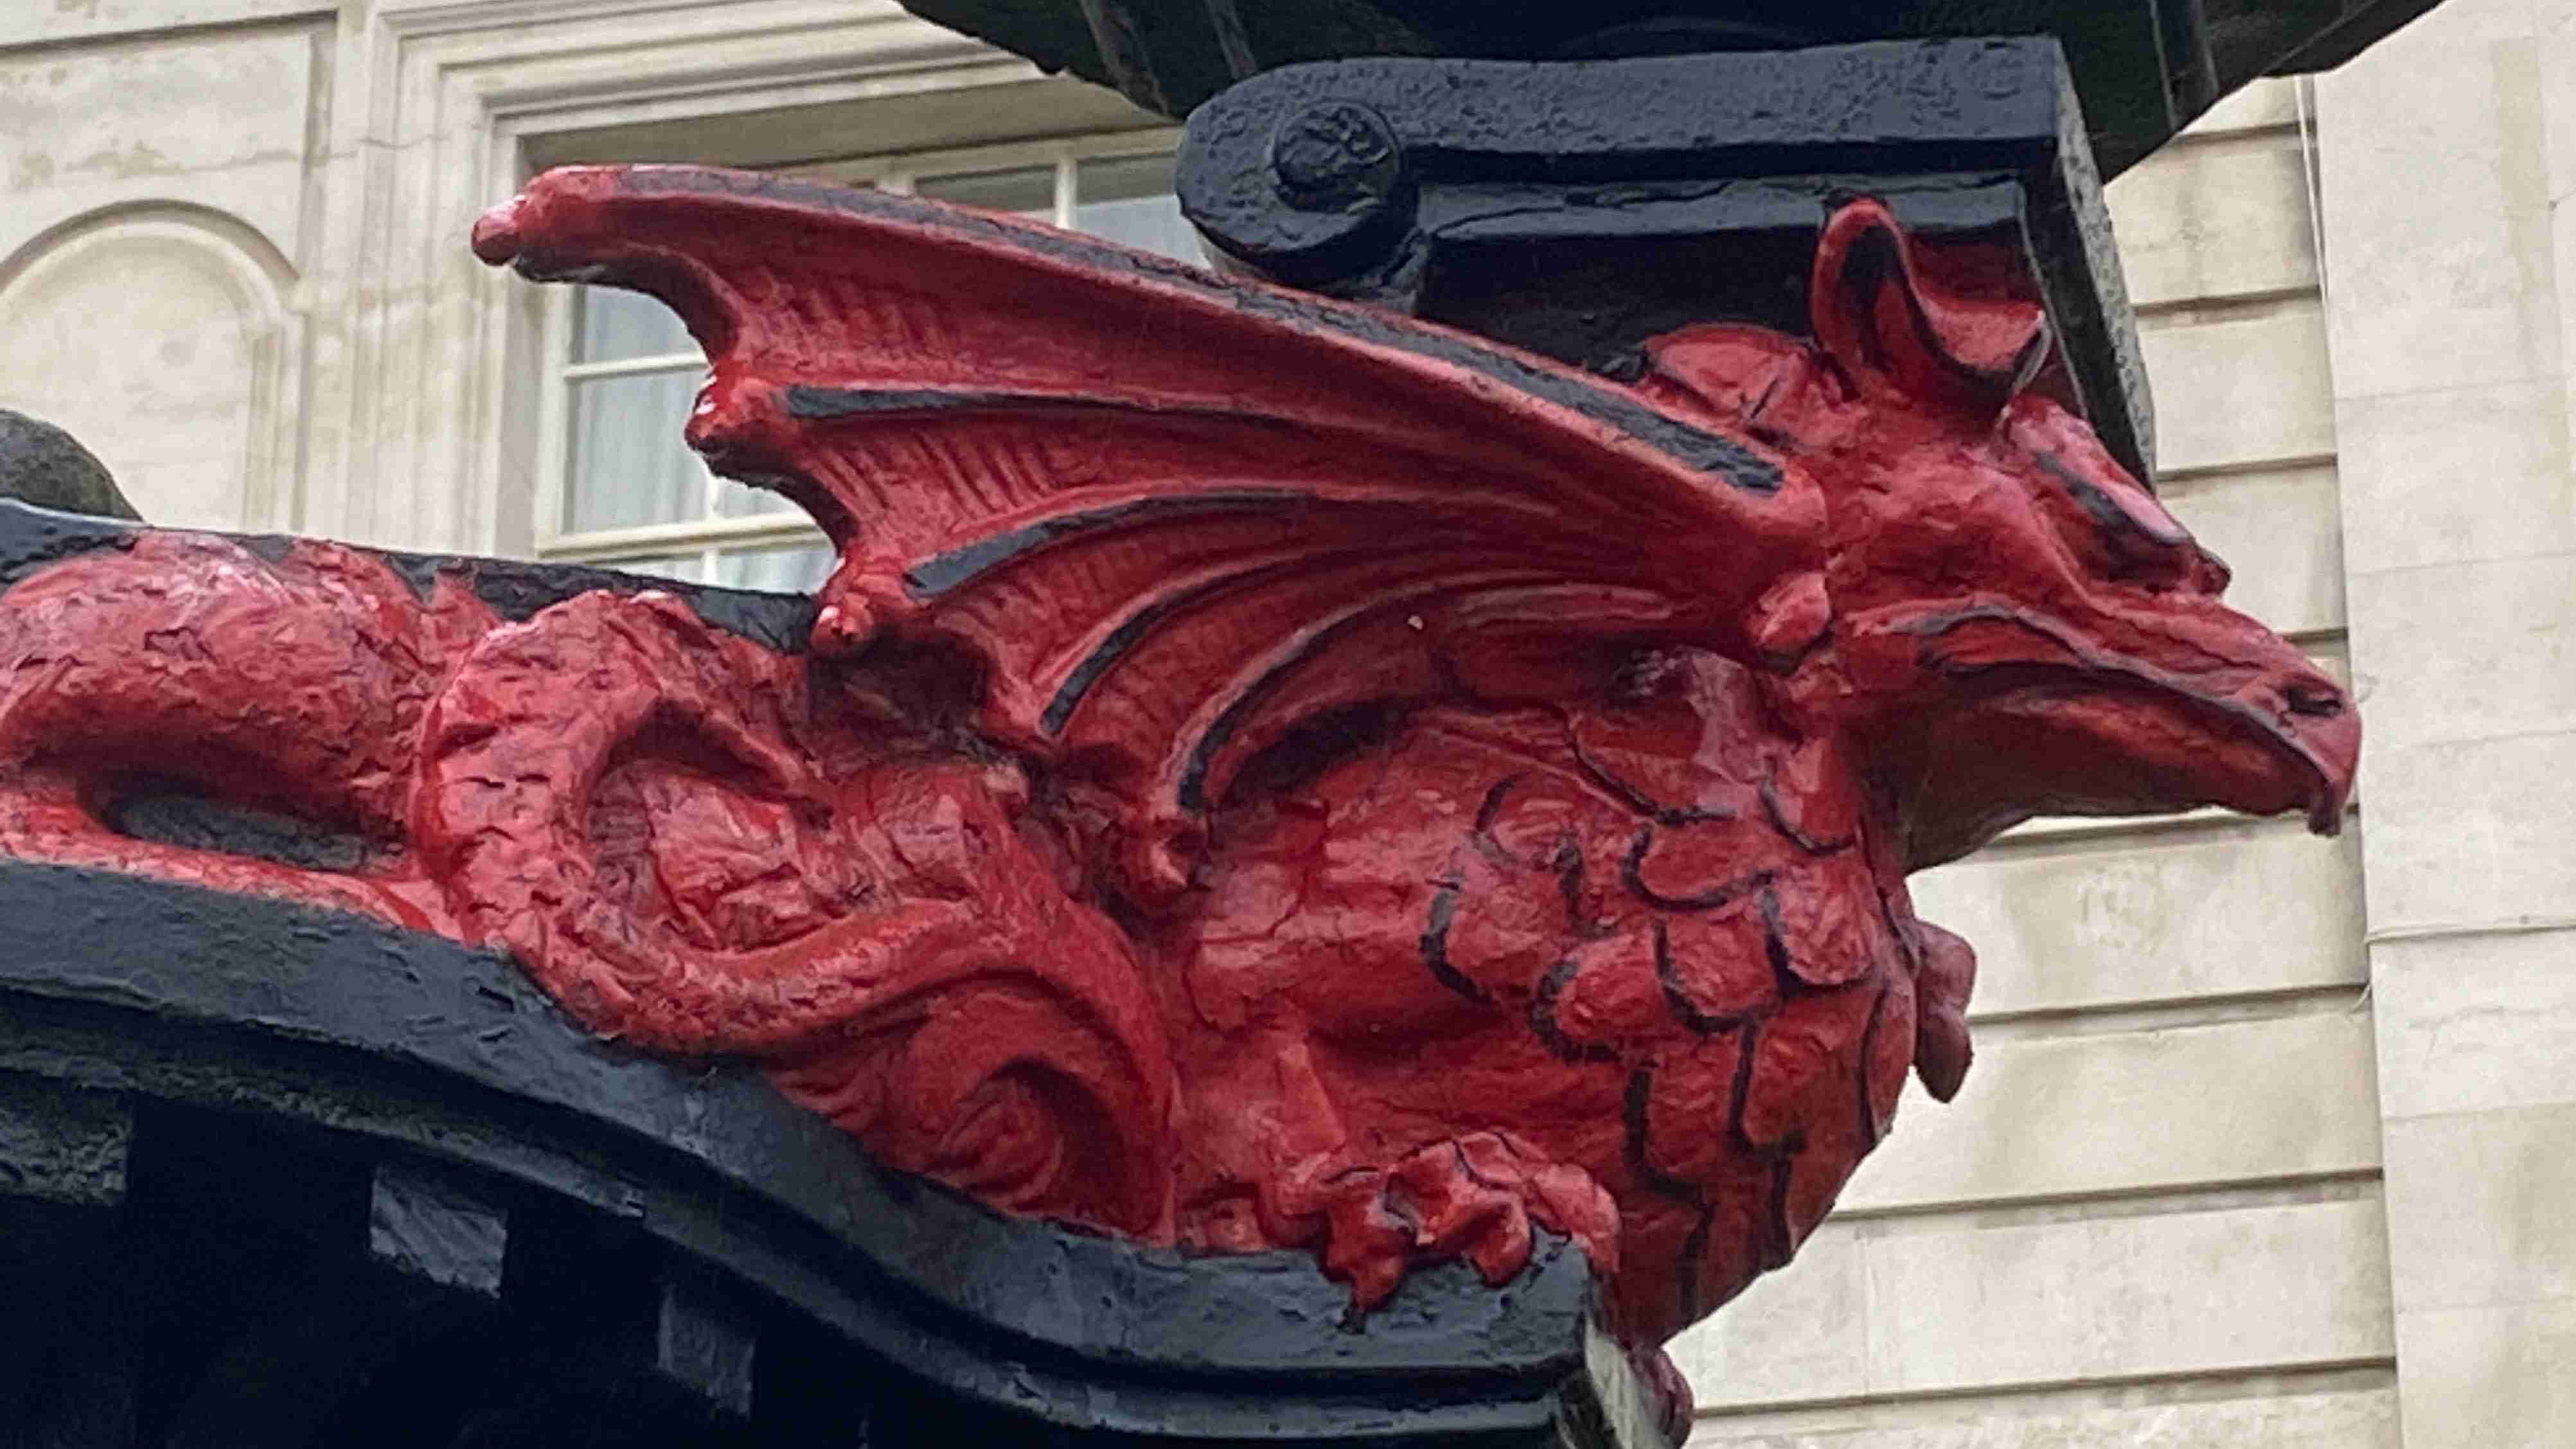 Dragon statue used for decoration of government buildings in Cardiff, Wales. /Iolo ap Dafydd, CGTN Europe